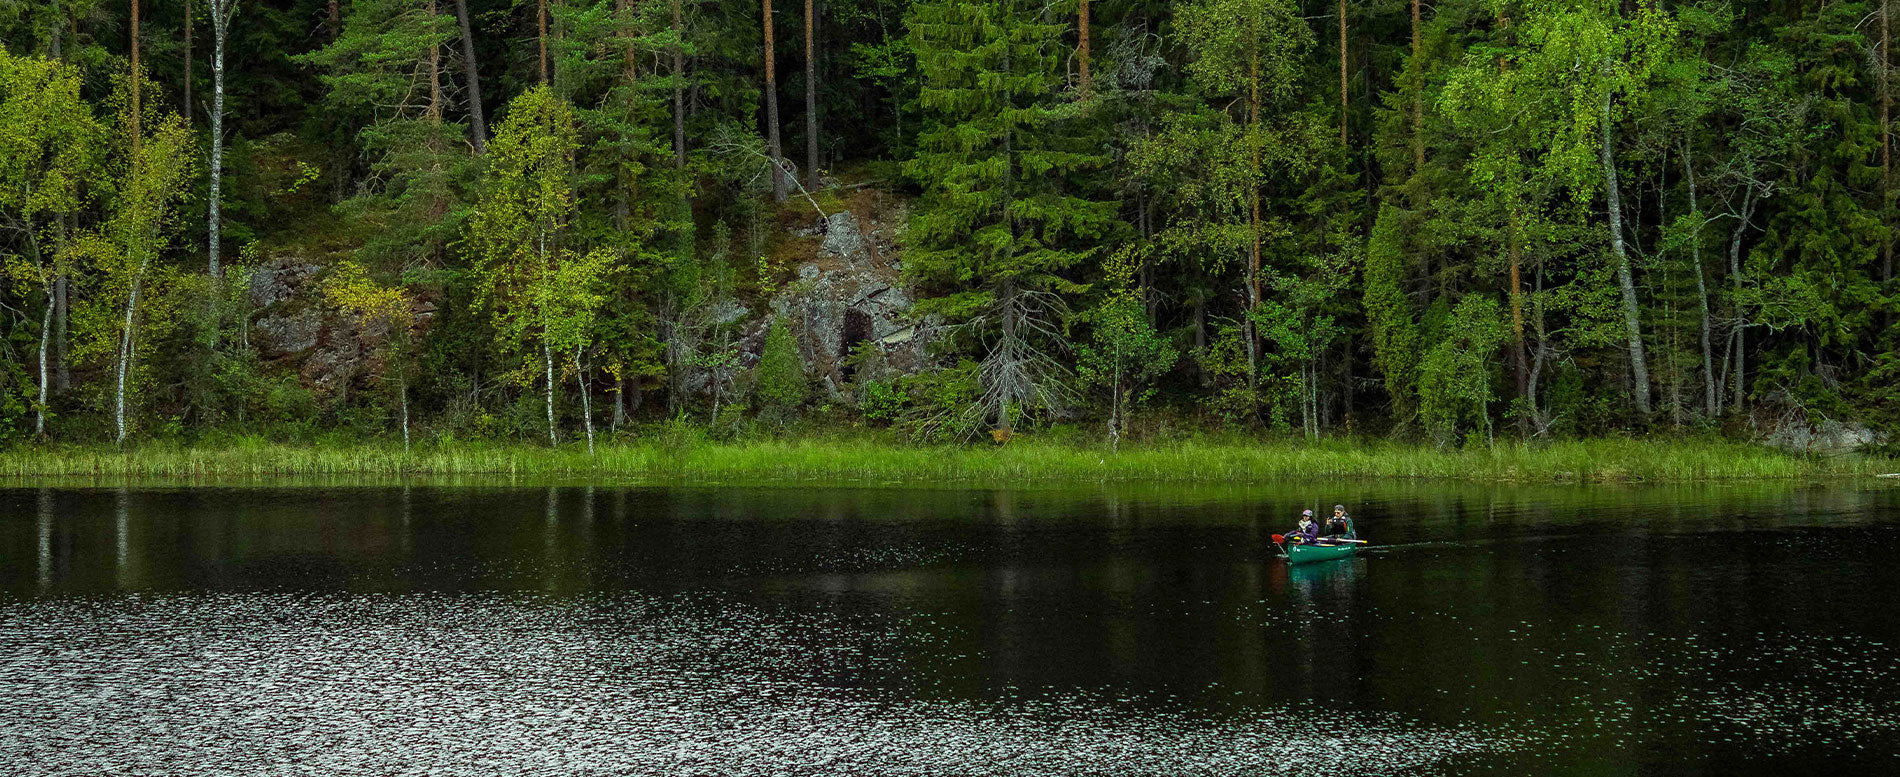 Epic Kayaking Spots in Finland To Blow Your Mind